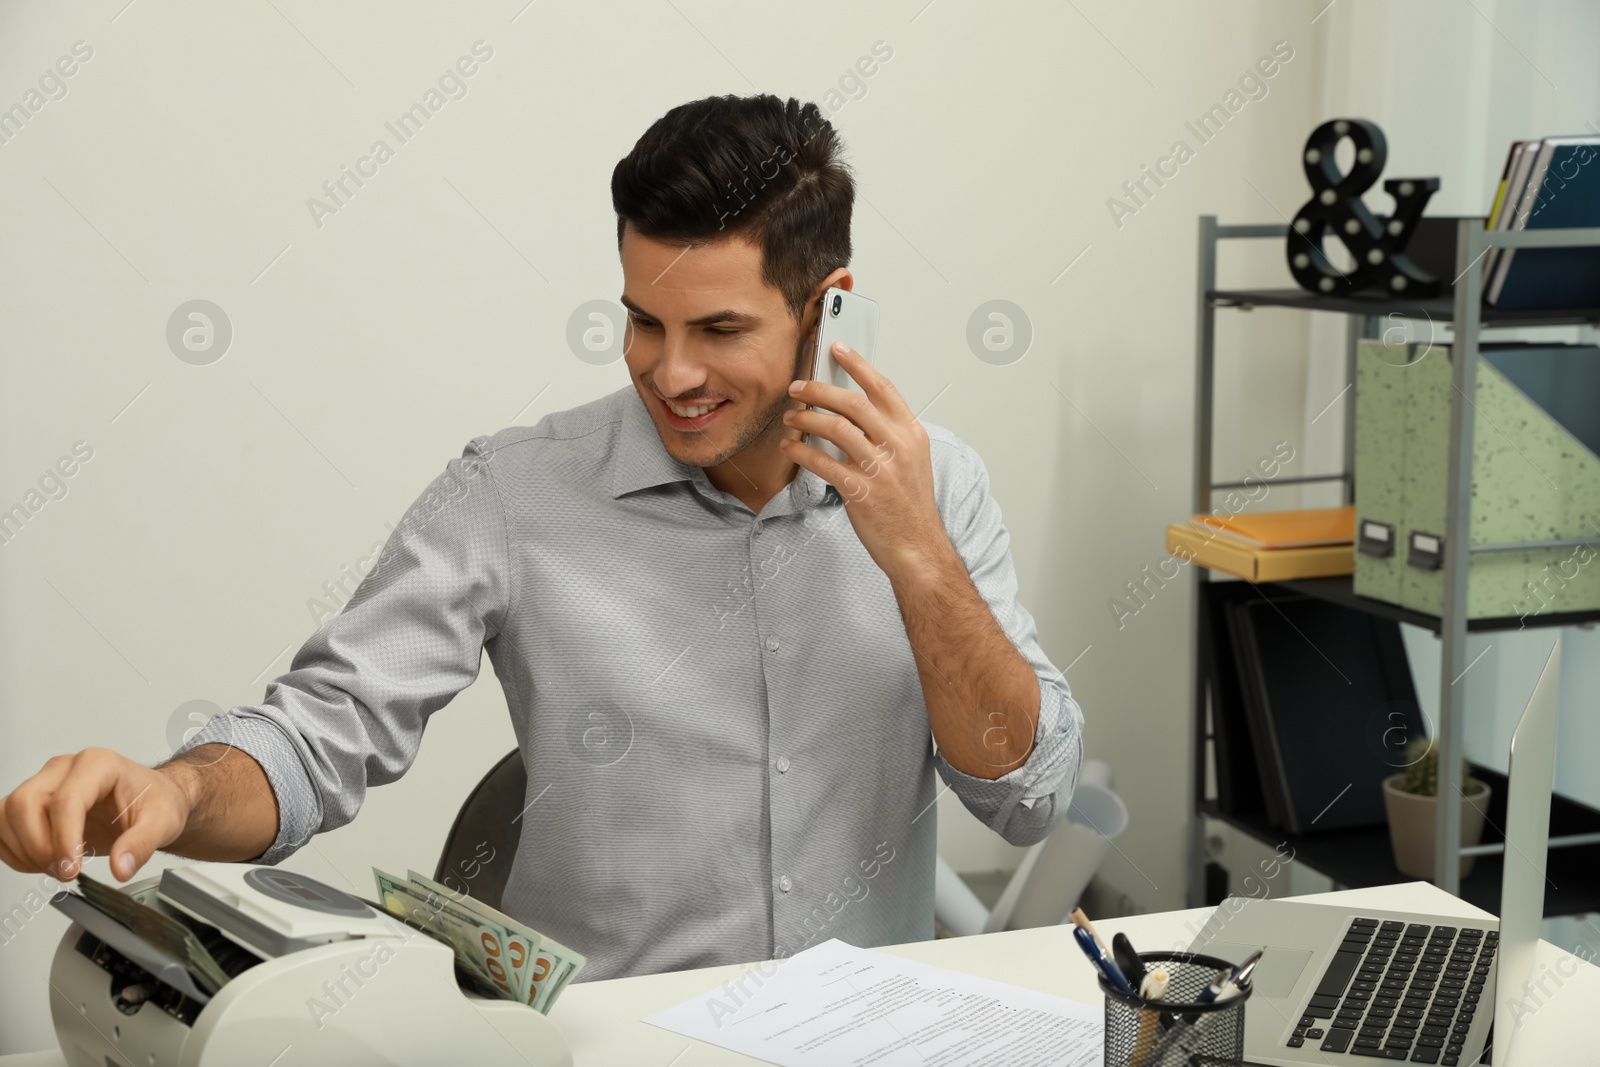 Photo of Man using banknote counter while talking on phone at white table indoors